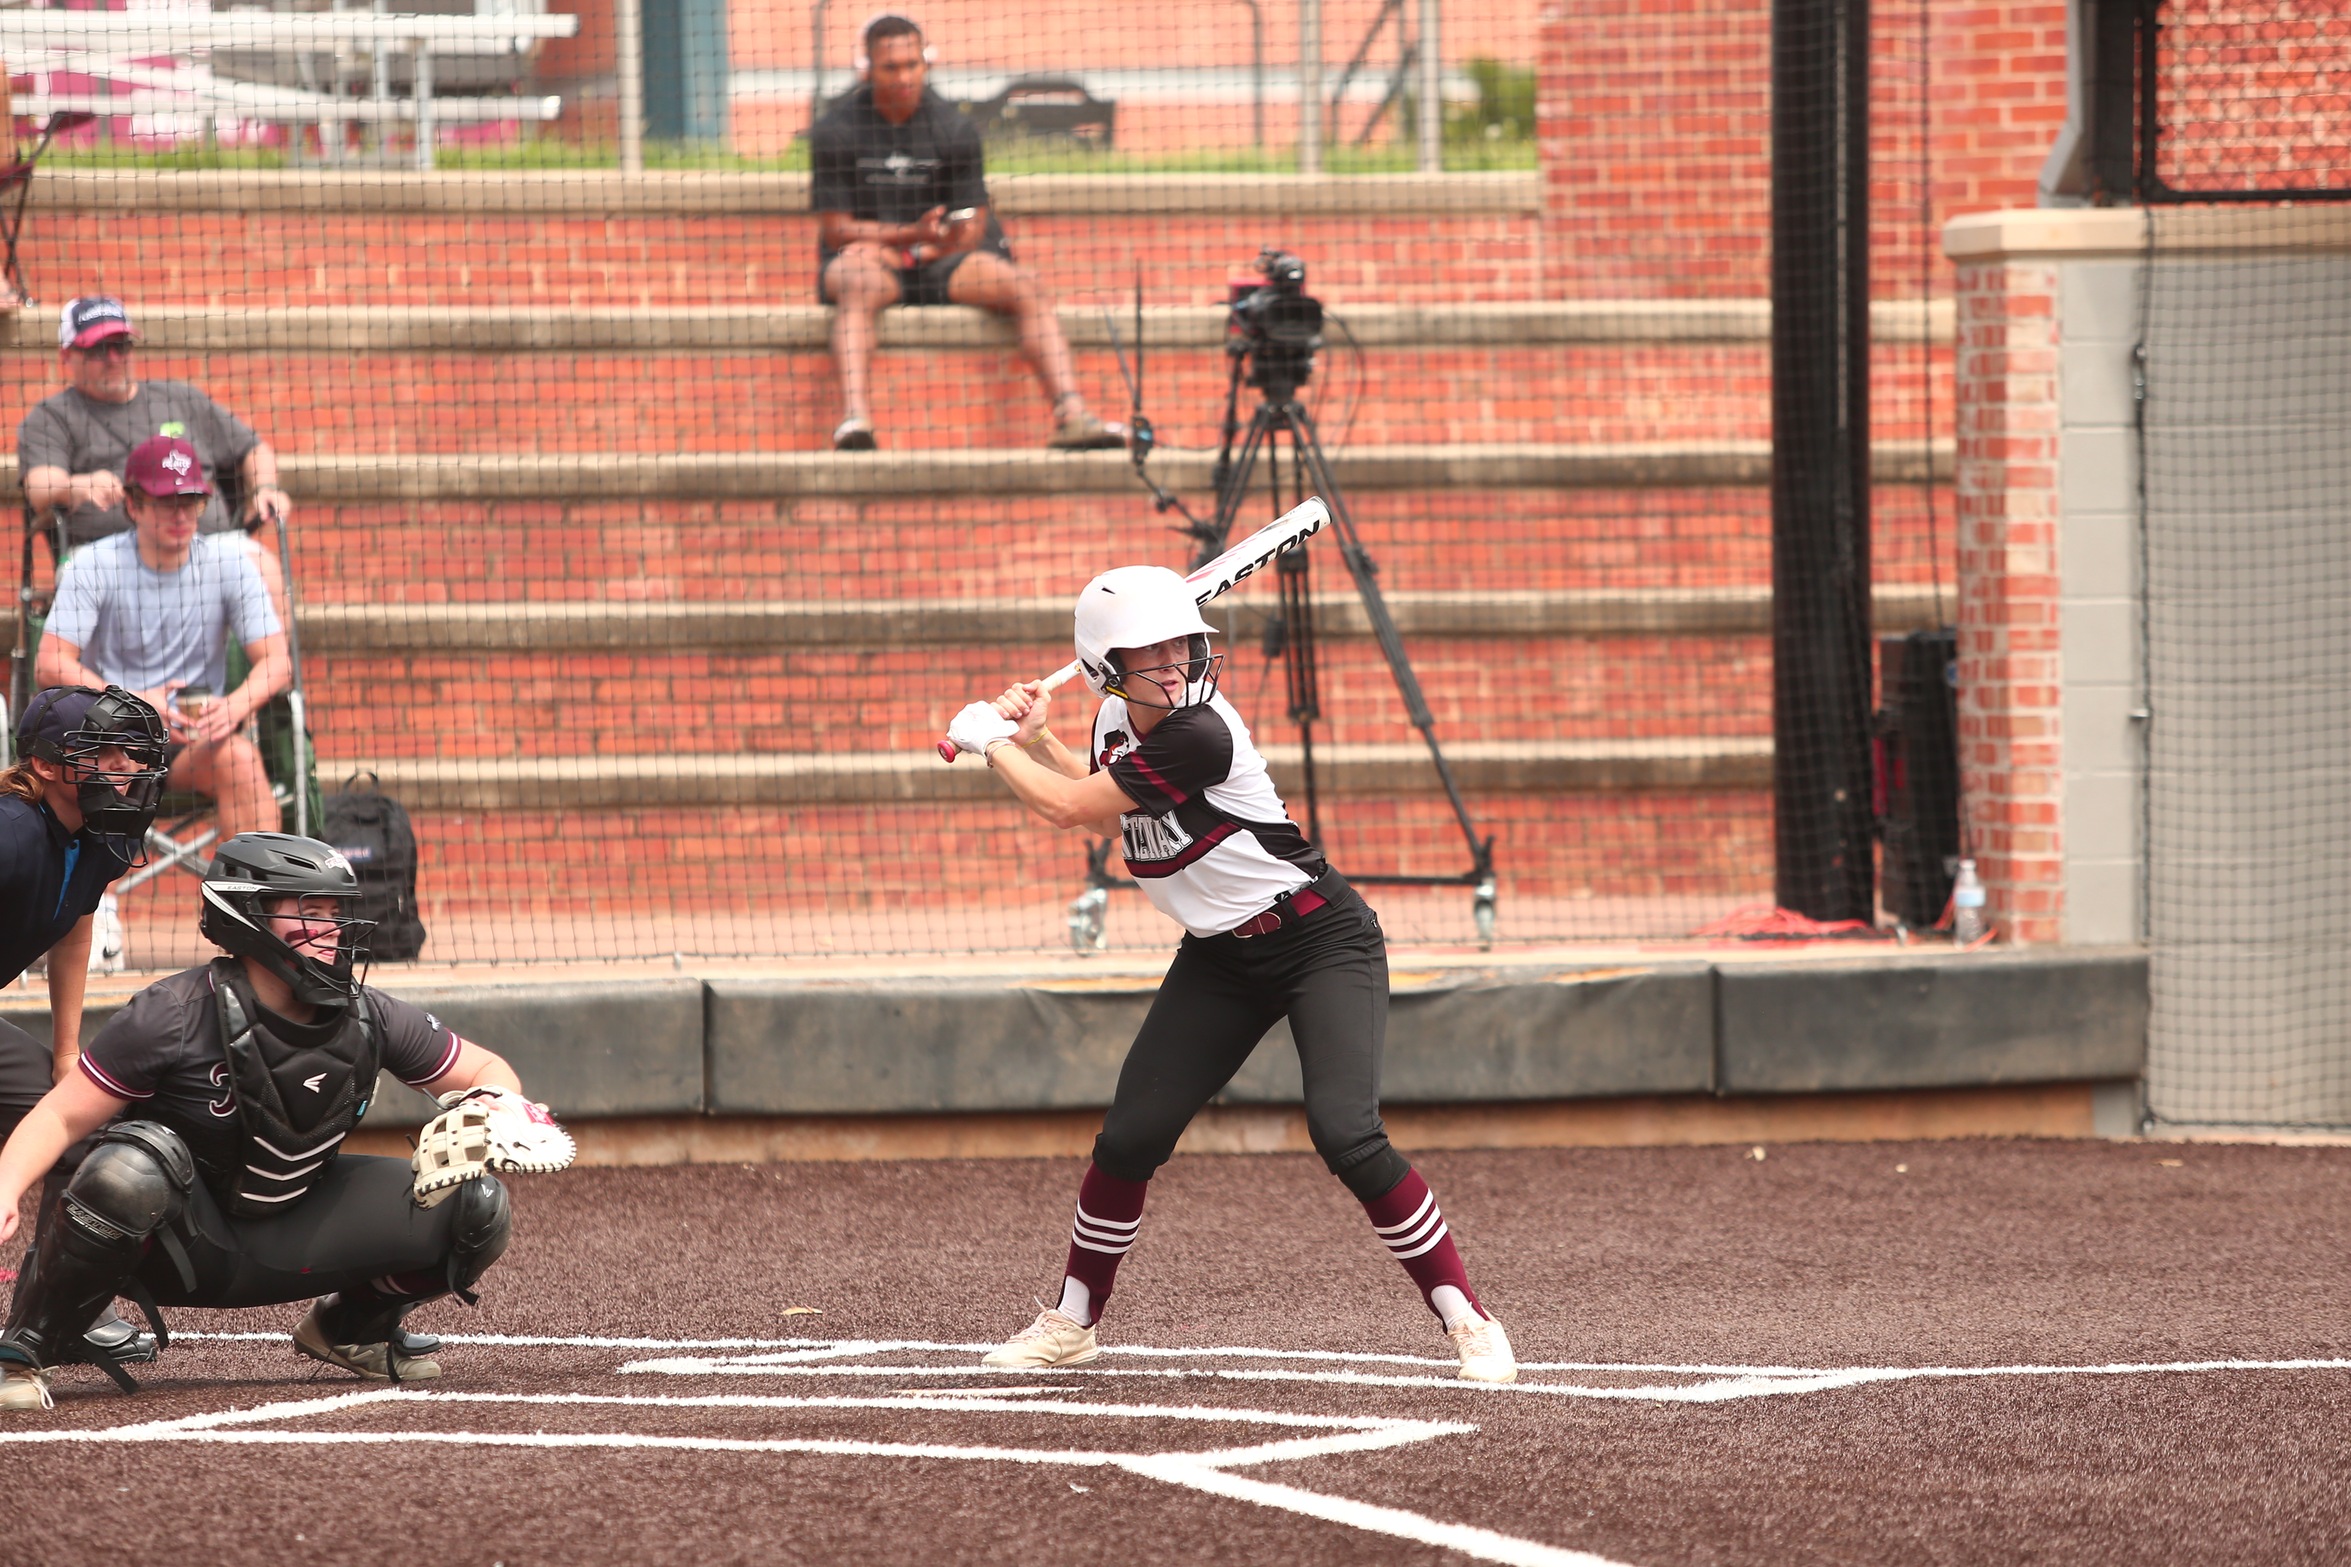 The Ladies fell 5-4 at Trinity on Sunday in the rubber game of the series. 

PHOTO: Will Powell, Trinity University Student